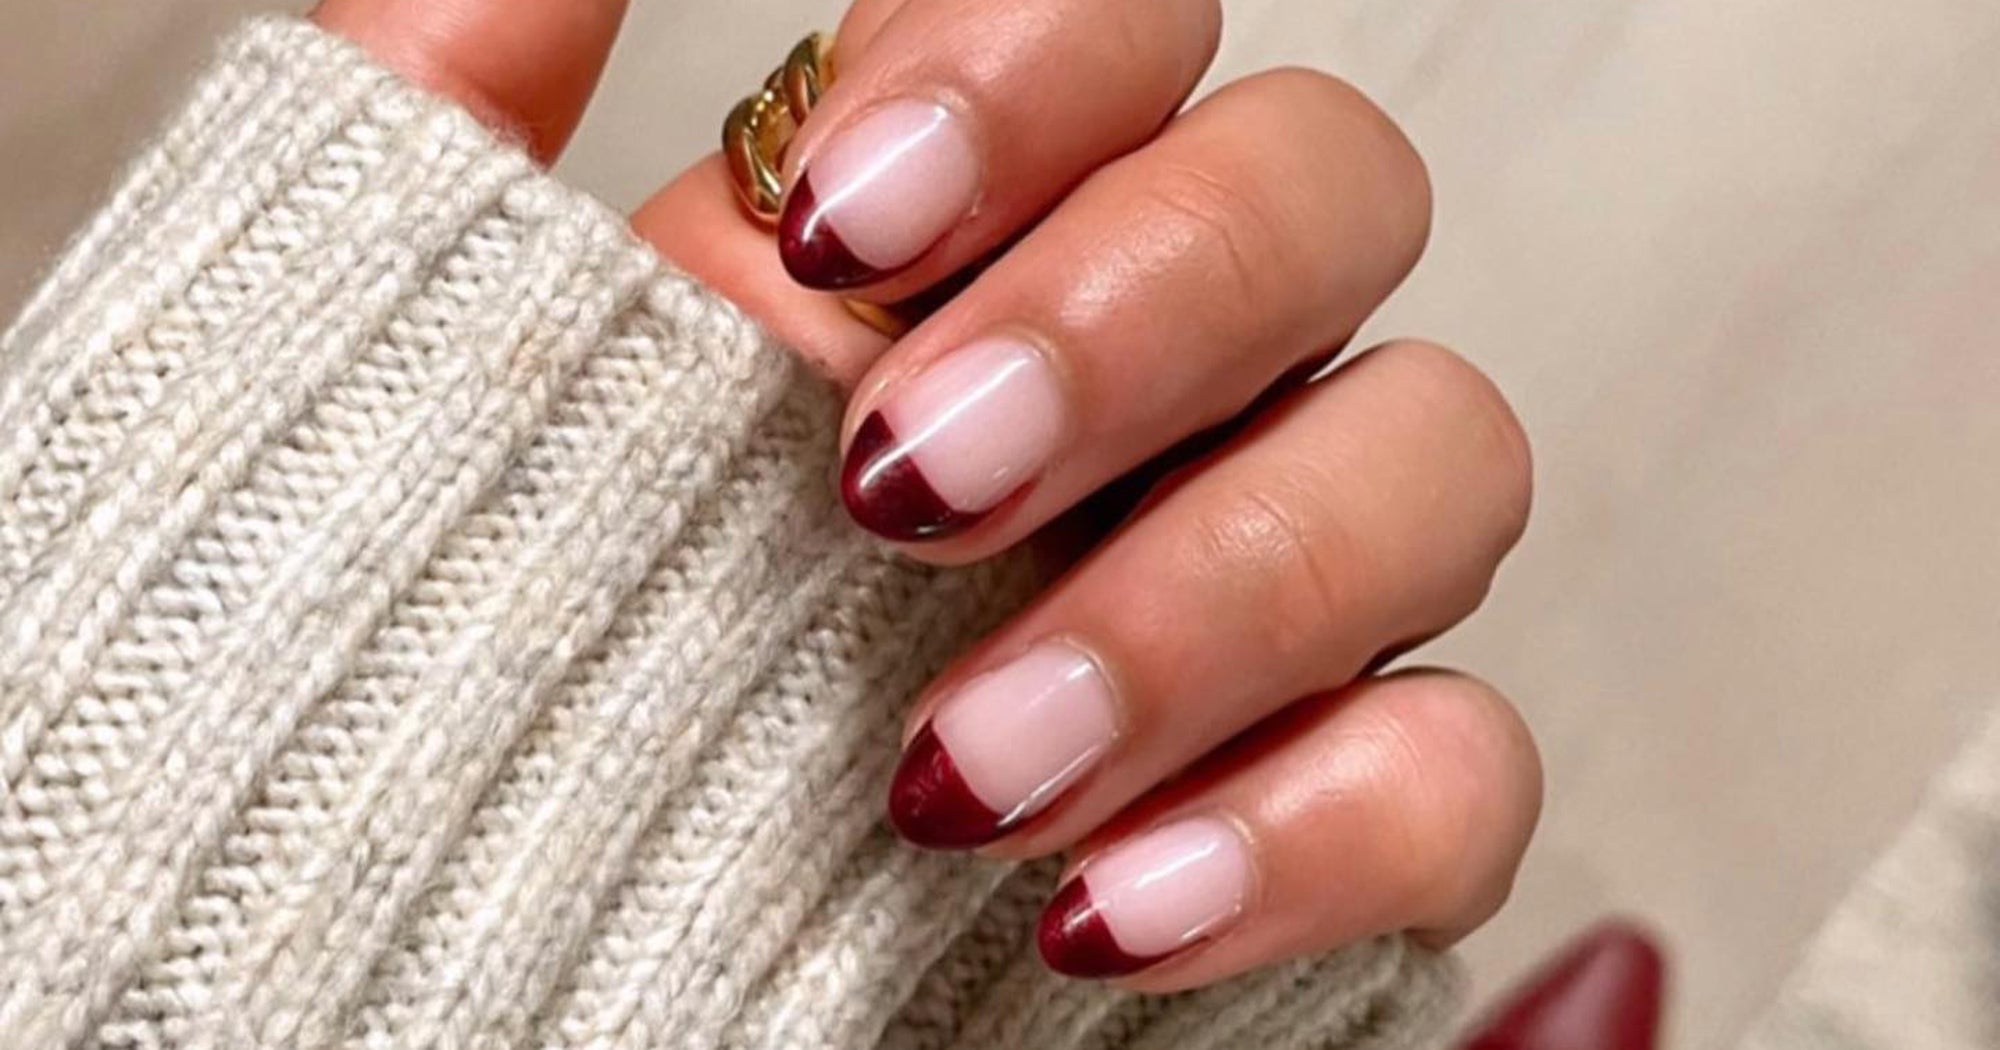 5 Nail Art & Manicure Trends You'll Want To Try In 2023